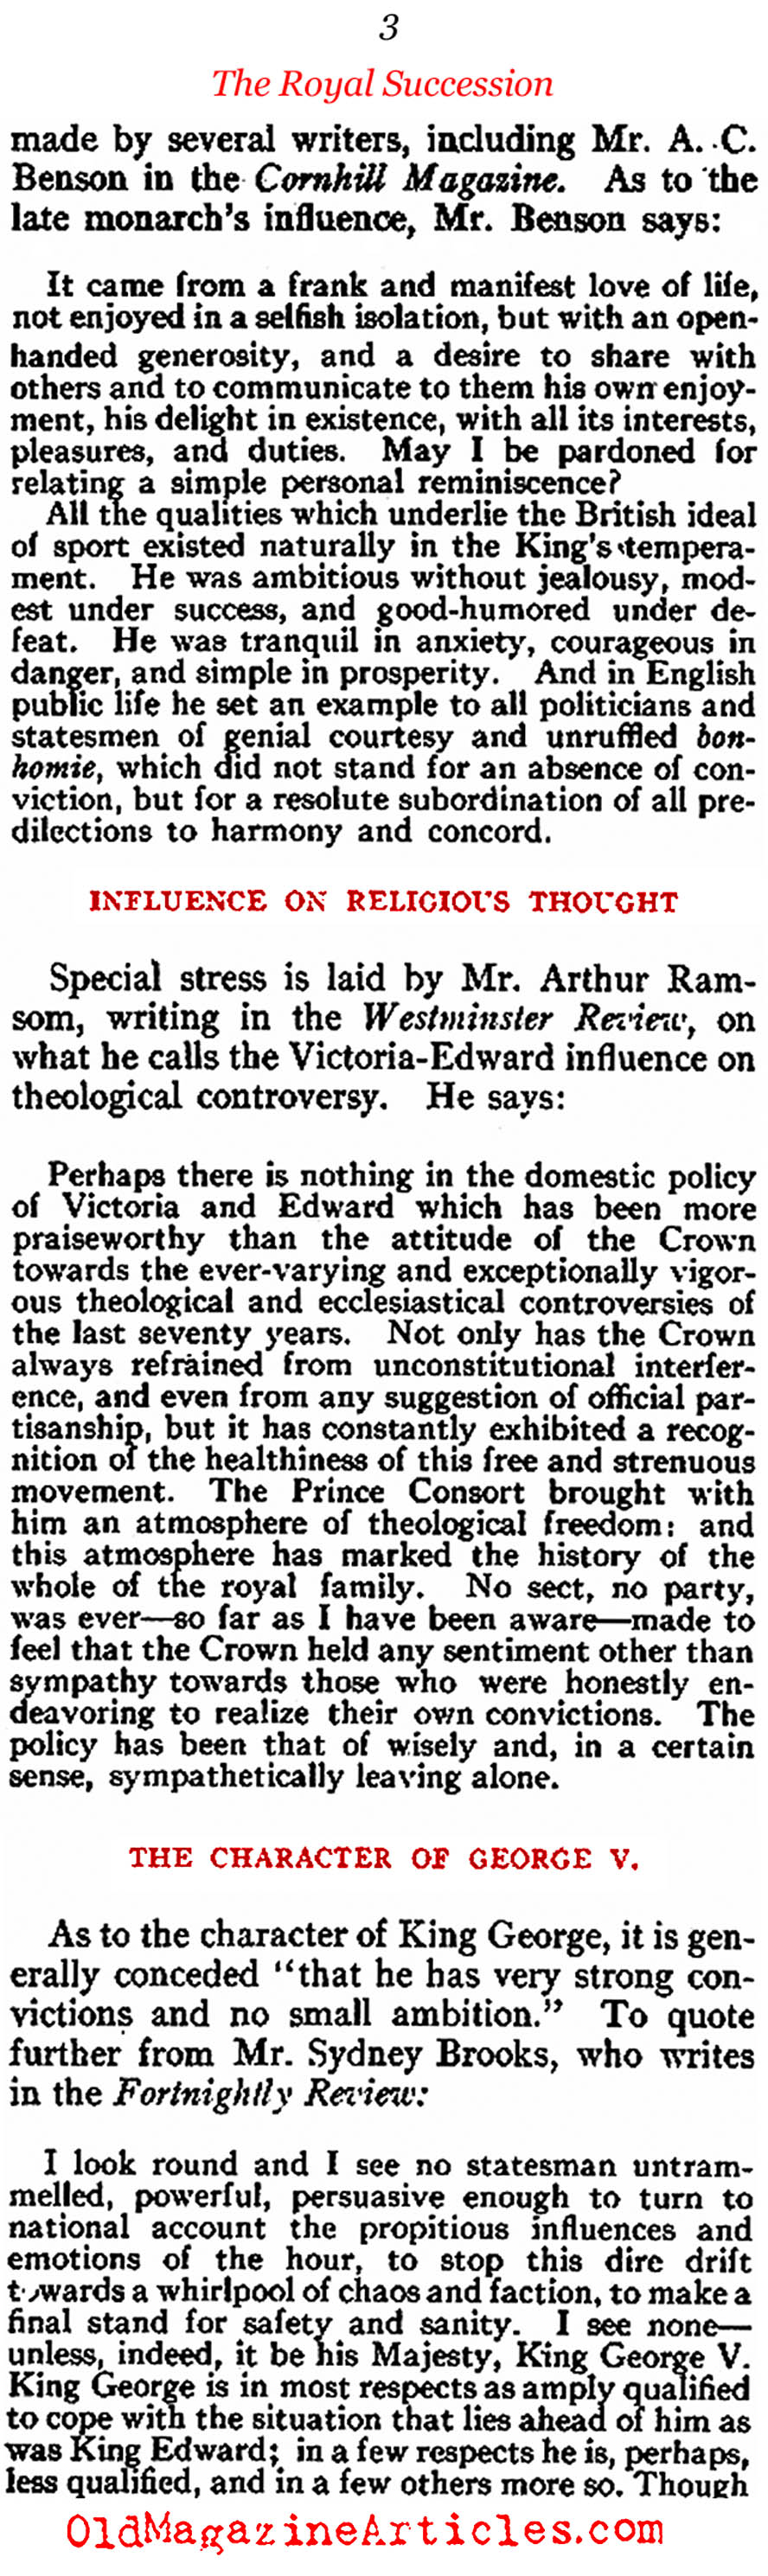 The Death of Edward VII and the Accession George V (Review of Reviews, 1910)